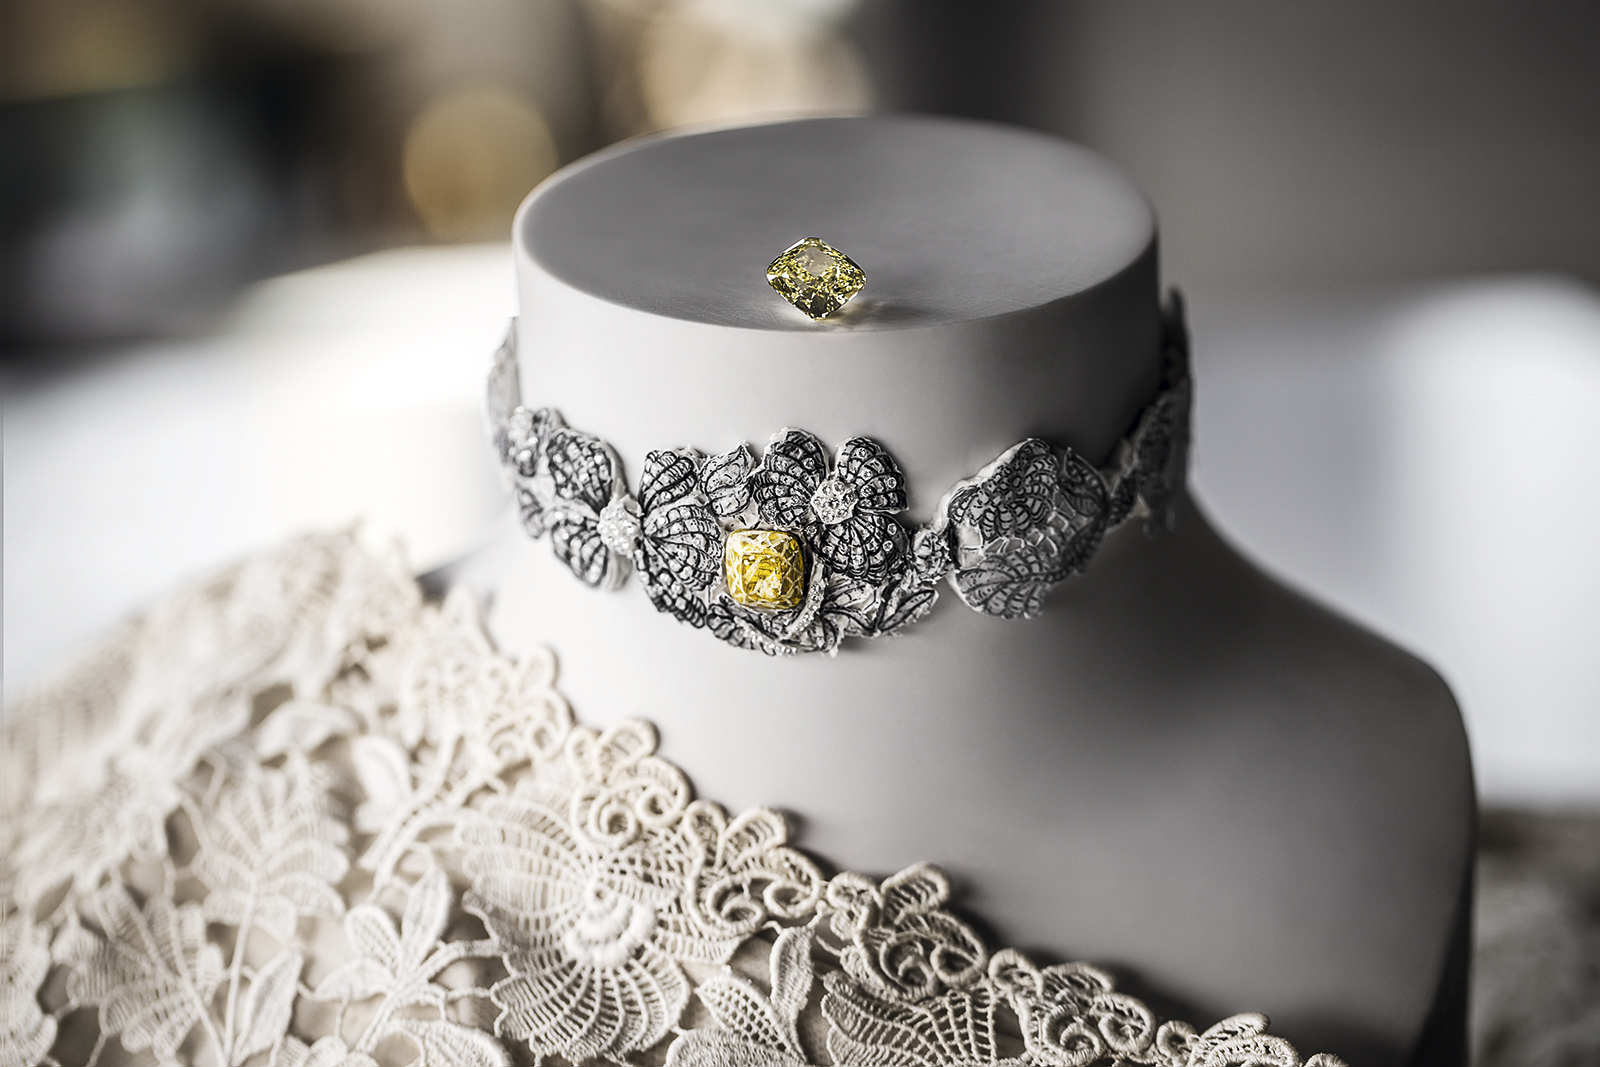 Dior ‘Dentelle Guipure Spinelle Jaune’ necklace in white gold, yellow diamond and diamonds